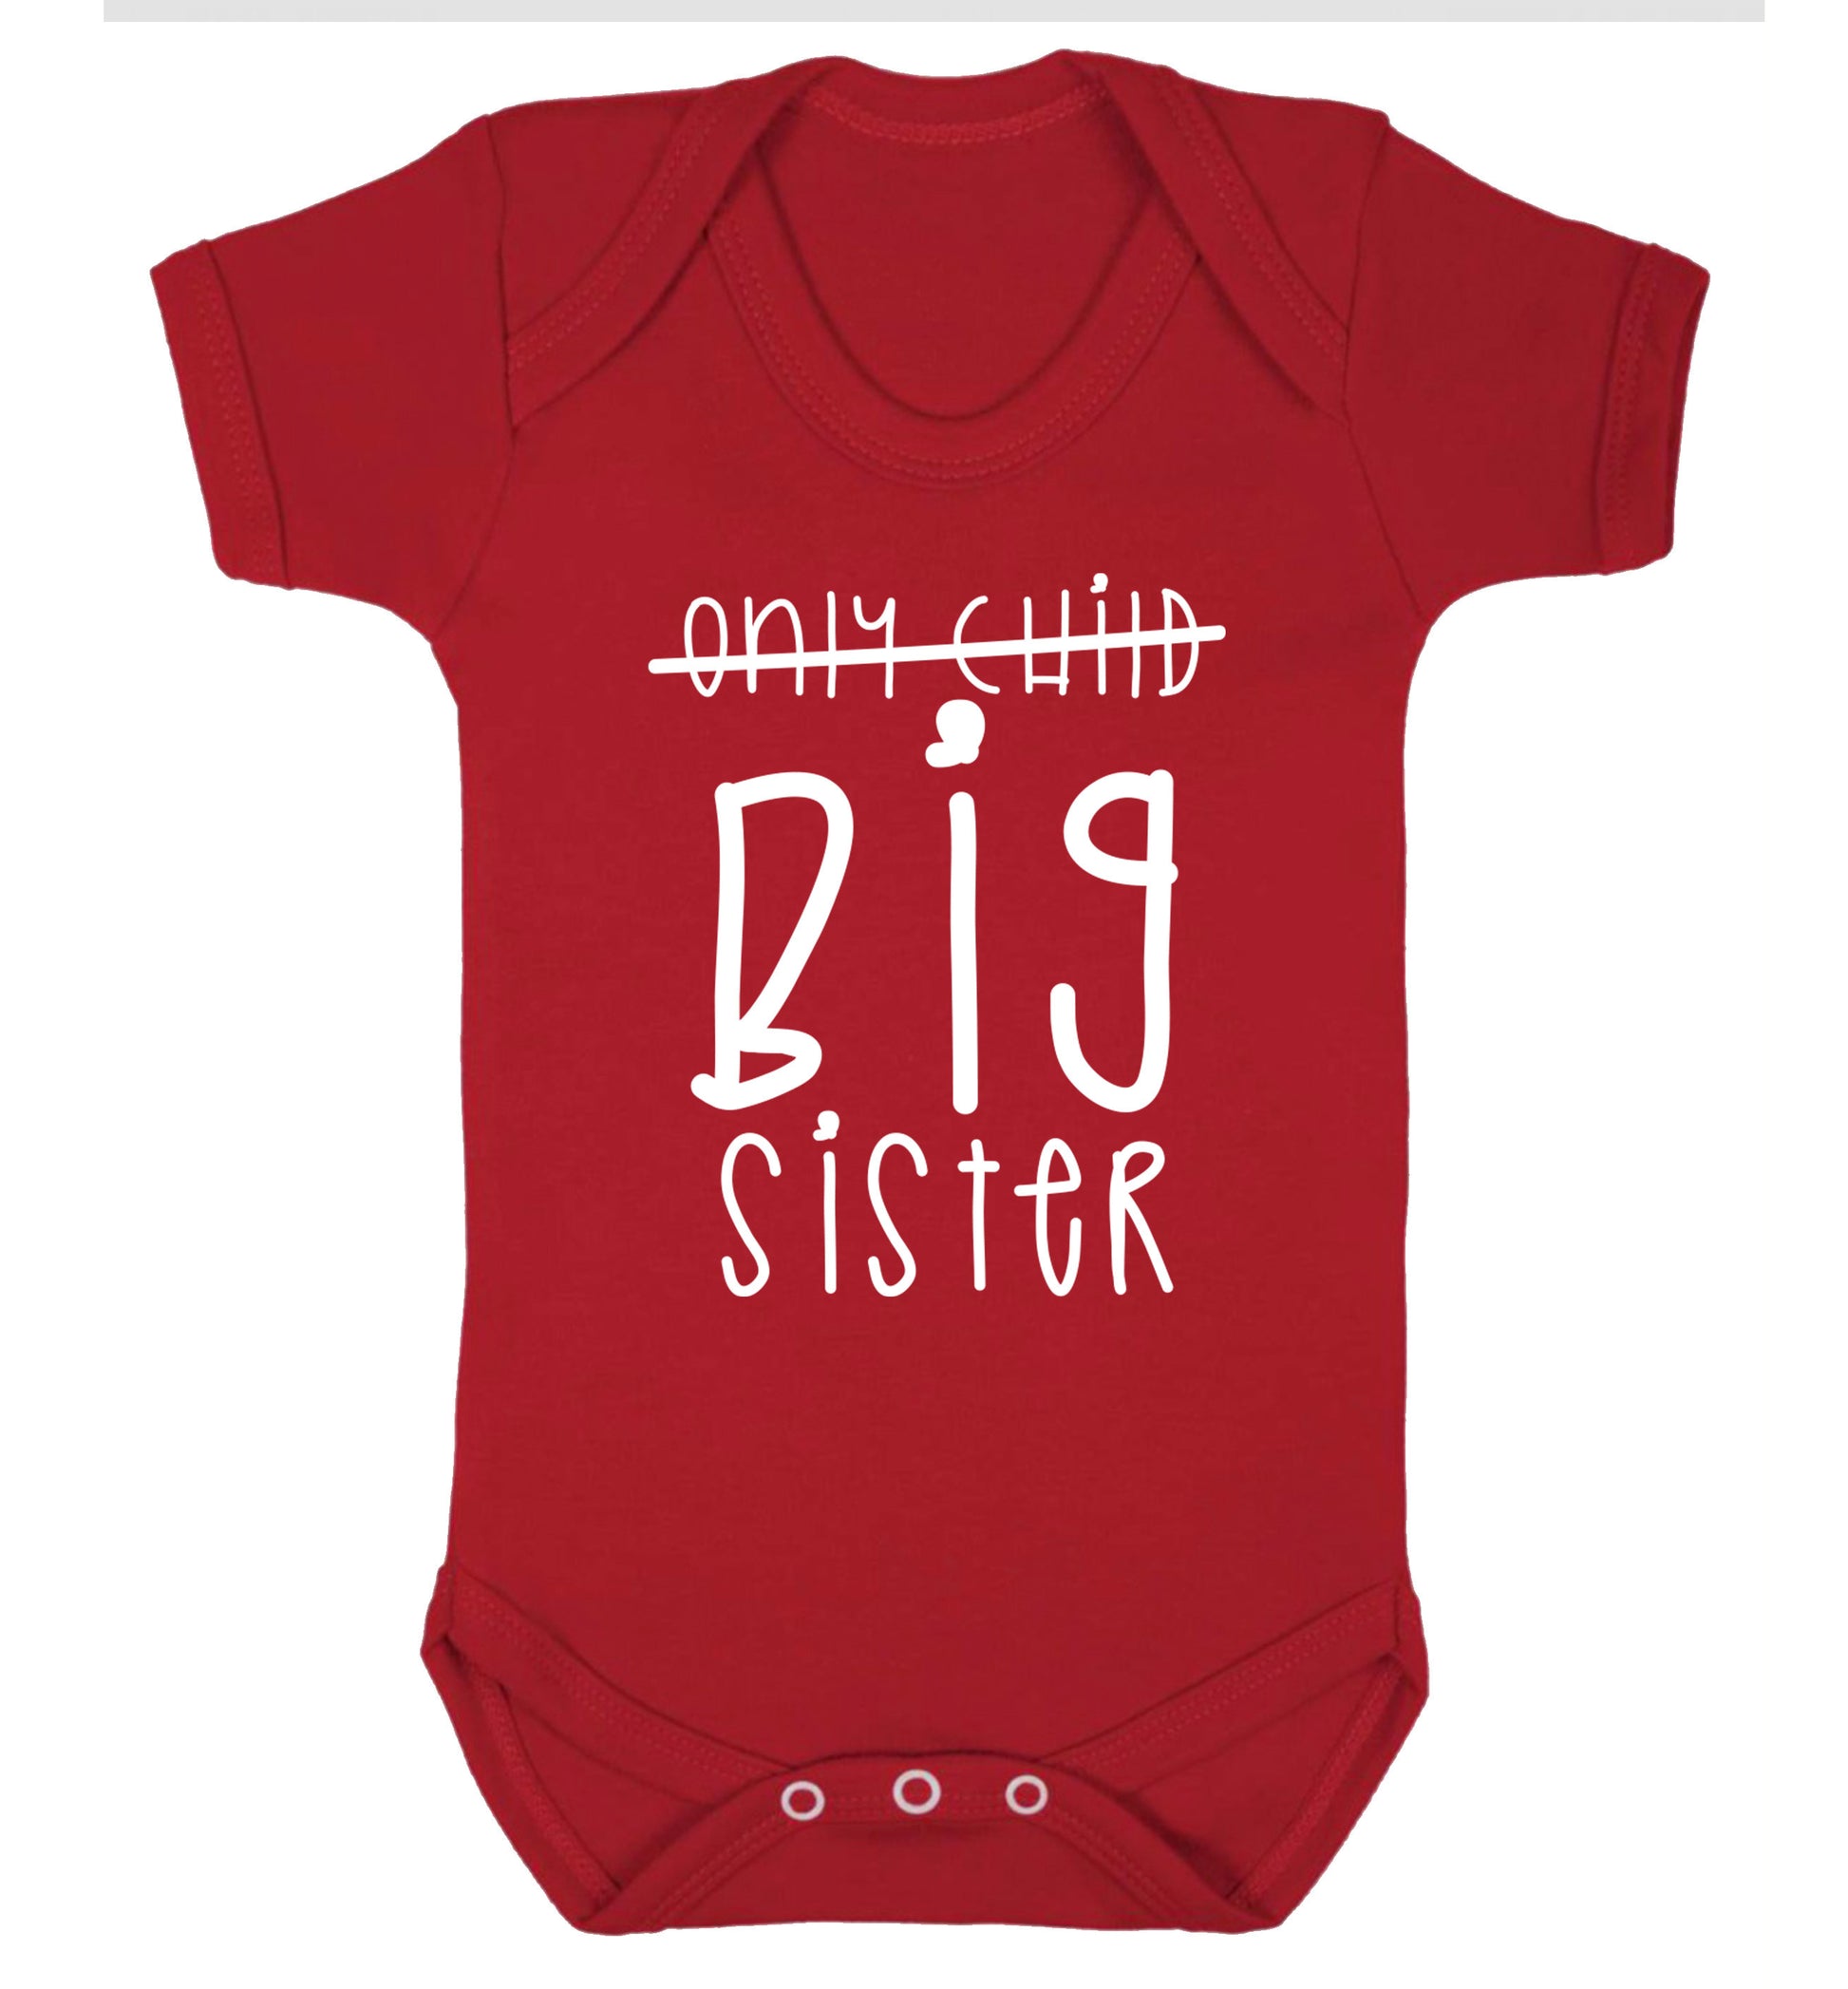 Only child big sister Baby Vest red 18-24 months